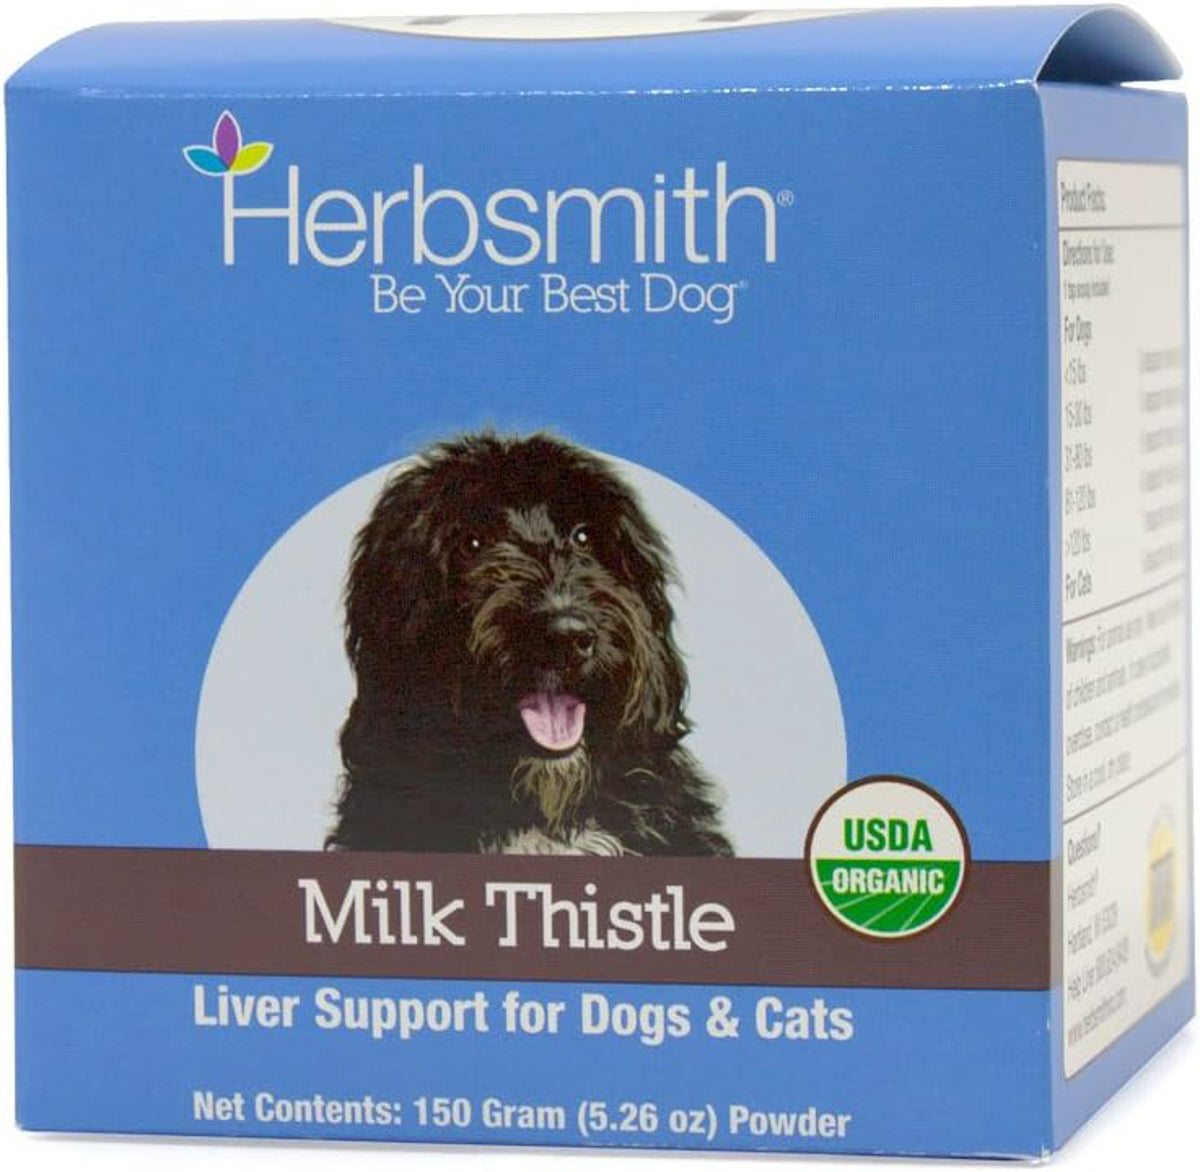 a box of milk thistle liver support supplement for dogs, with a black shaggy dog on the front